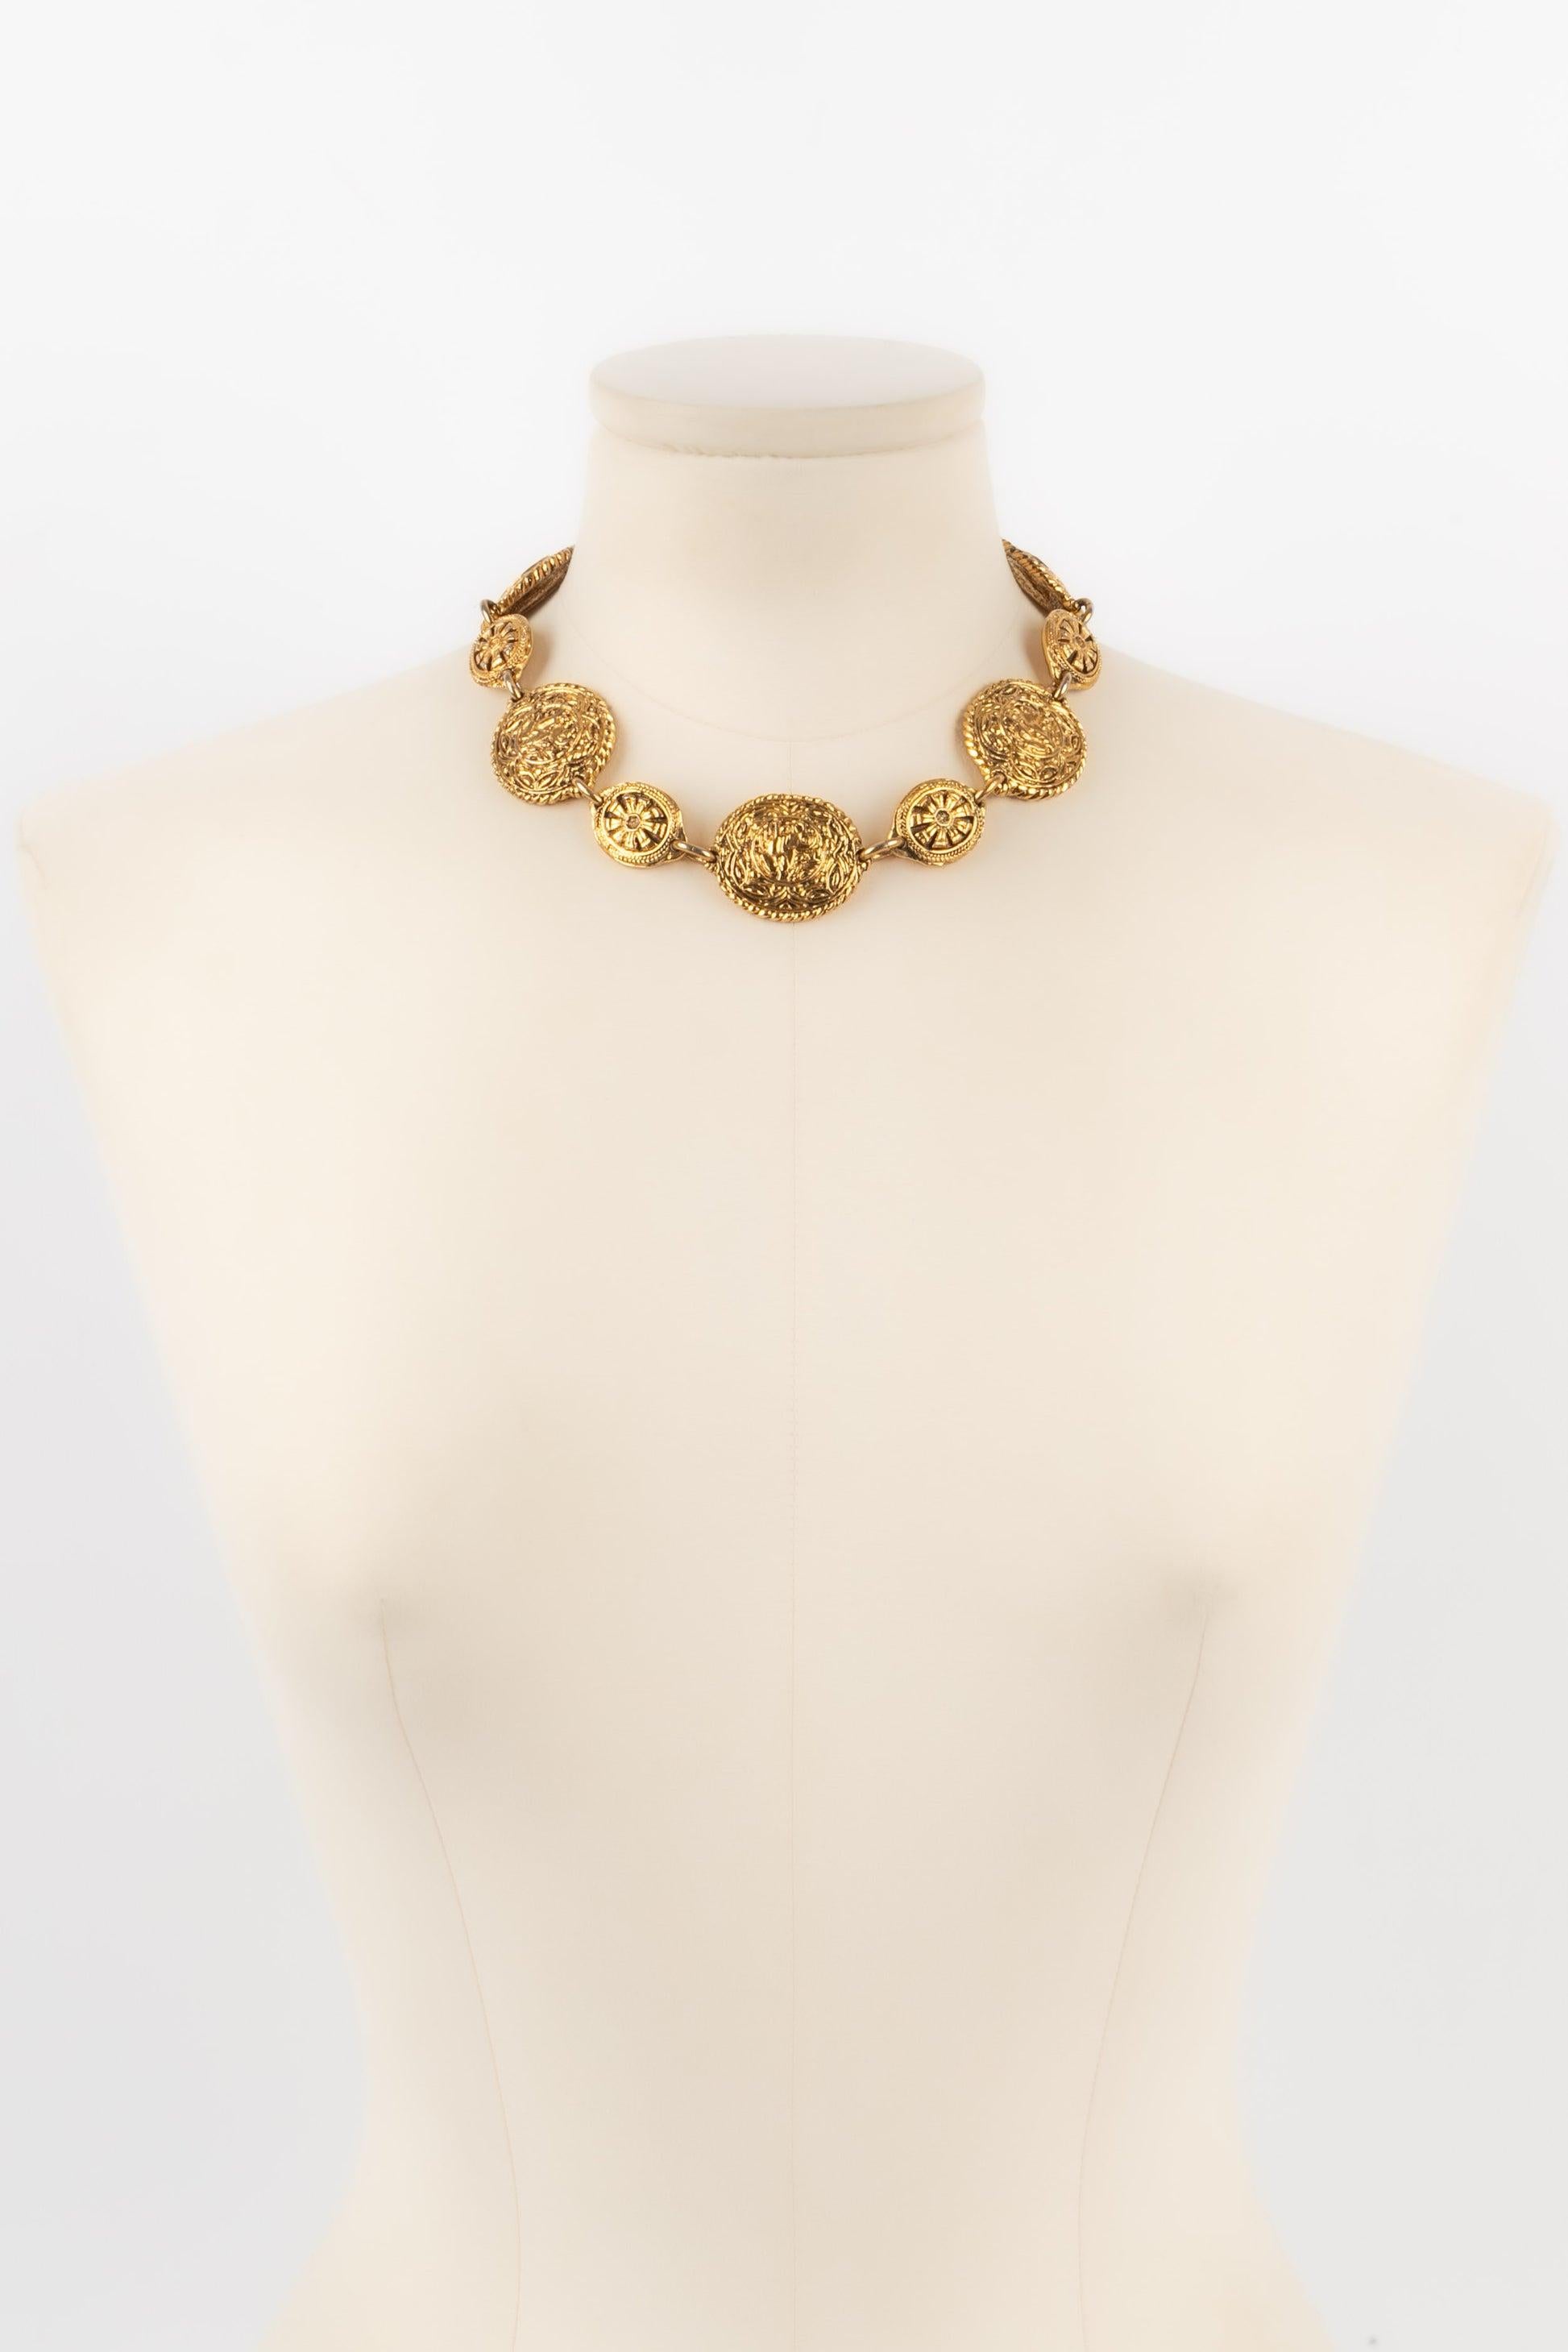 Chanel - (Made in France) Short necklace in golden metal from the 1980s.

Additional information:
Condition: Good condition
Dimensions: Length: 41 cm

Seller Reference: CB221
